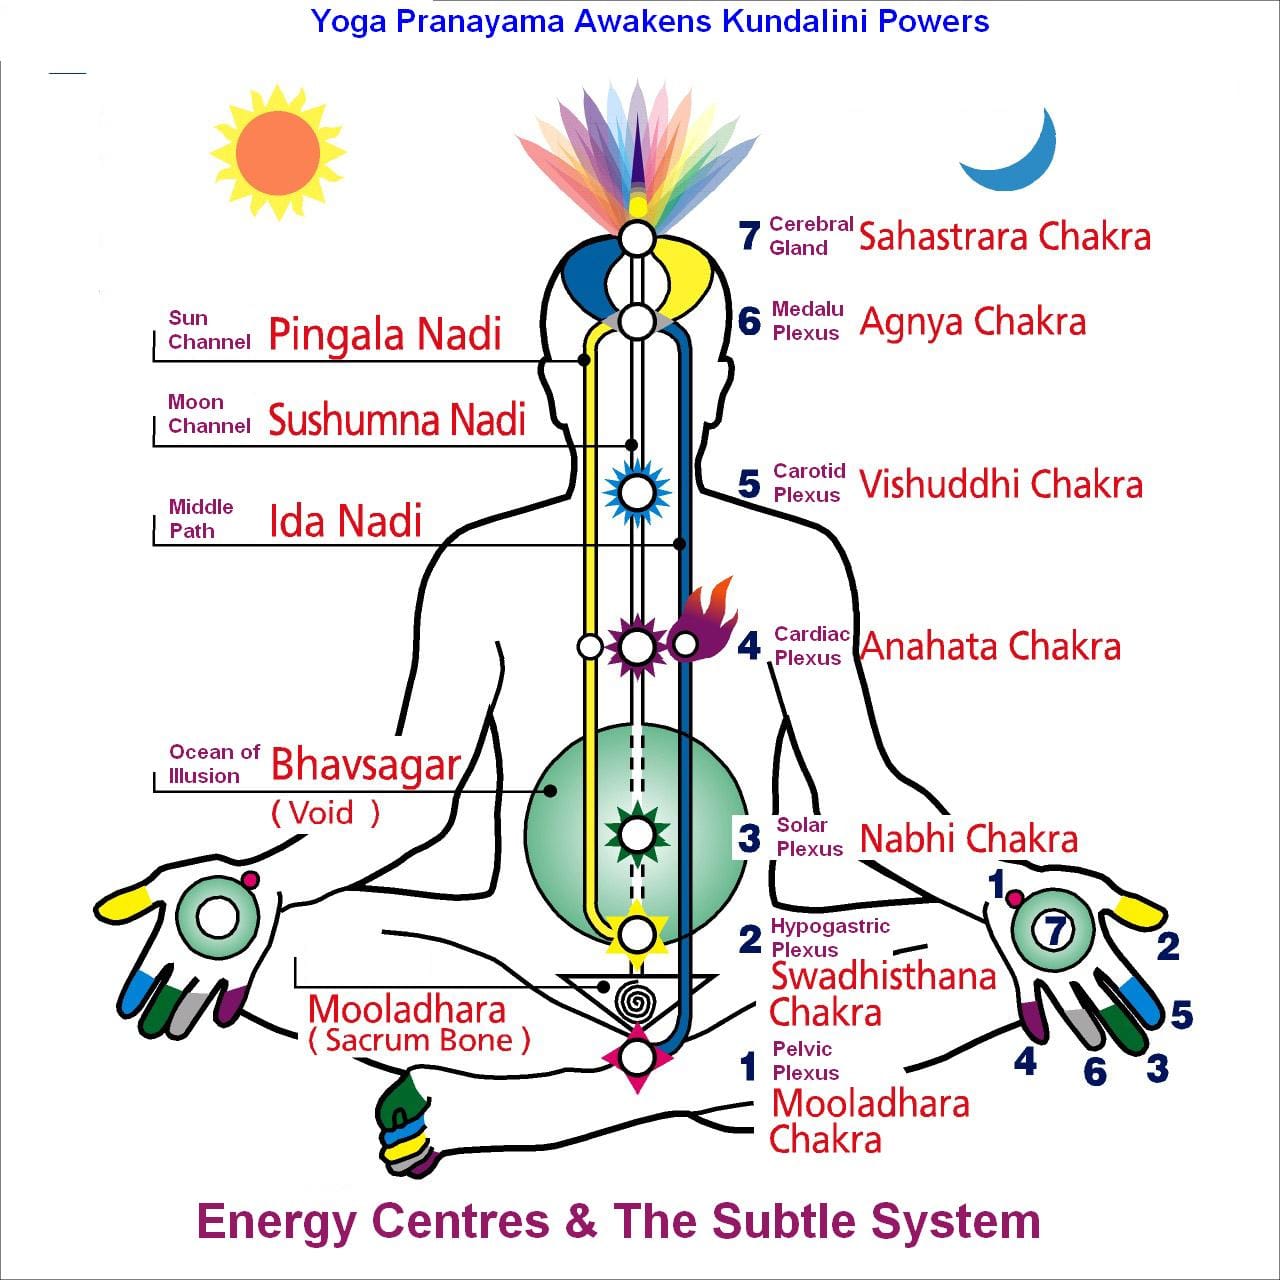 Energy centres and the subtle system